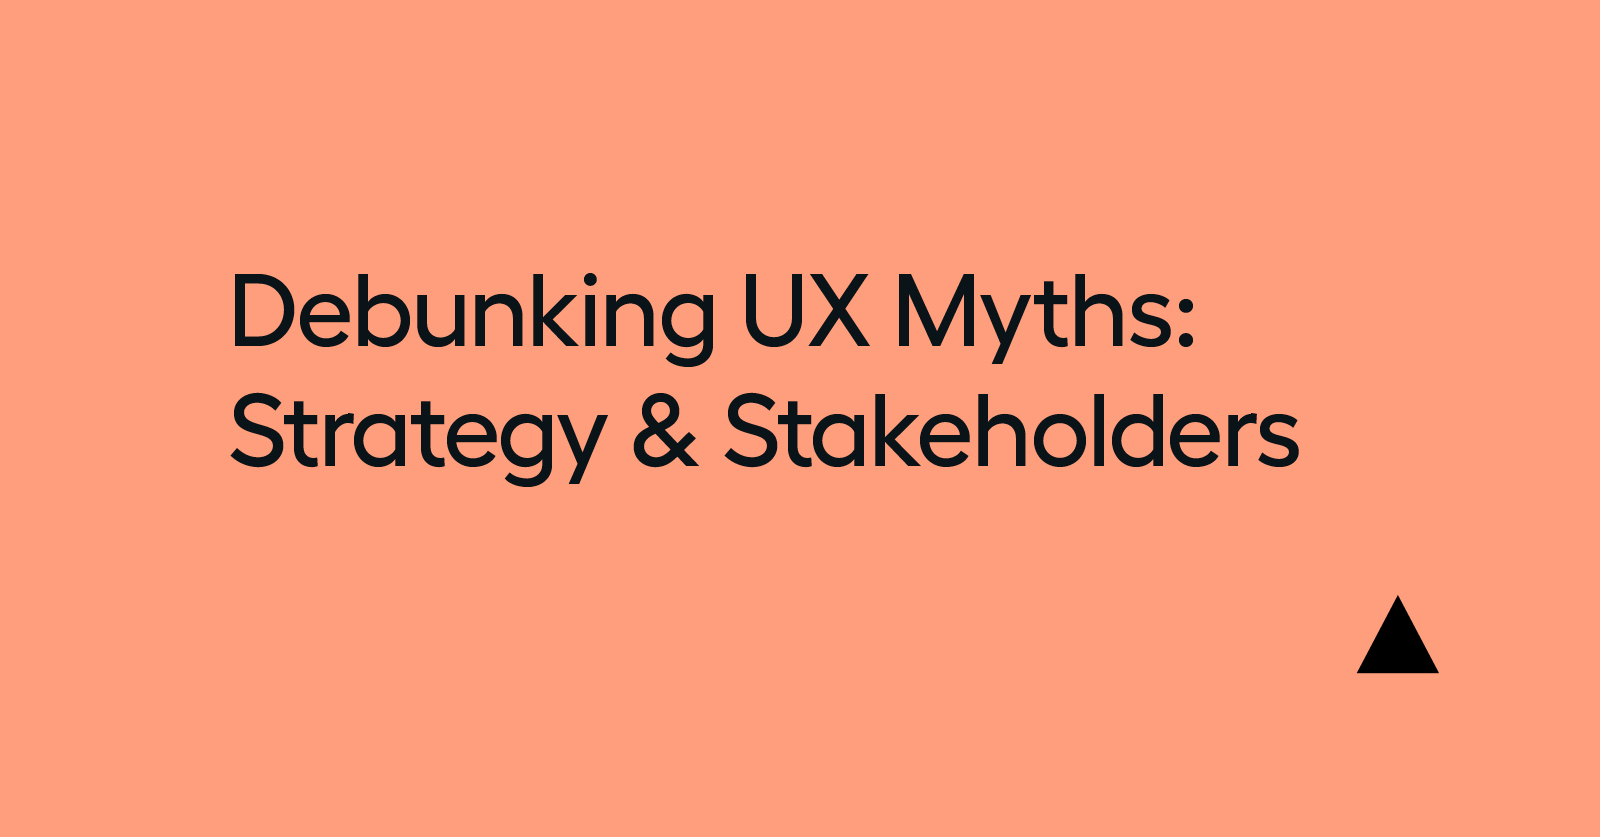 text: Debunking UX Myths: Strategy & Stakeholders